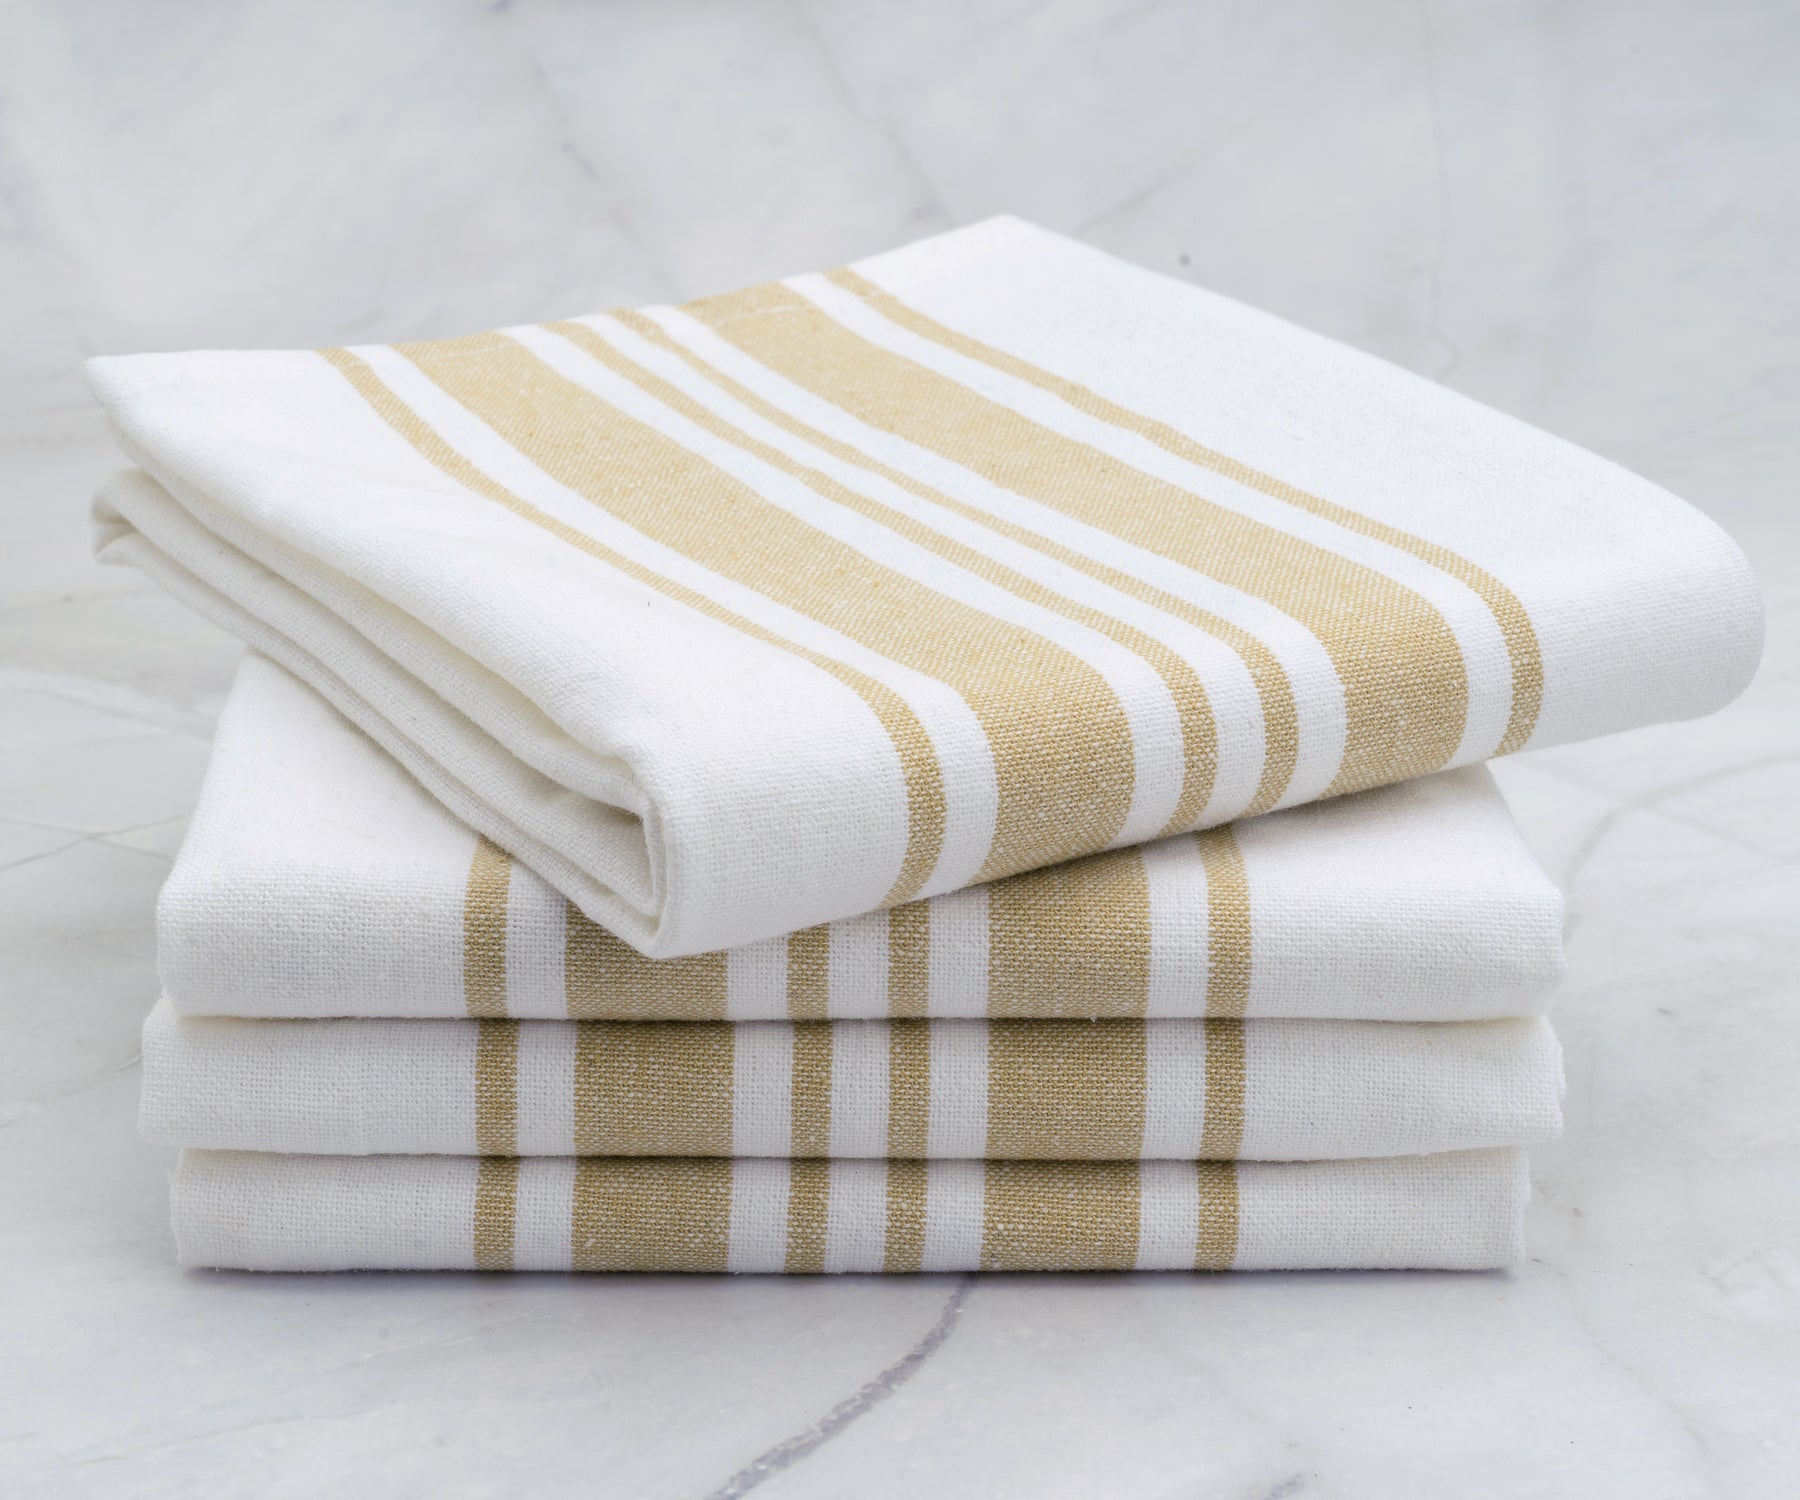 An array of white kitchen towels with gold stripes arranged on a marble surface